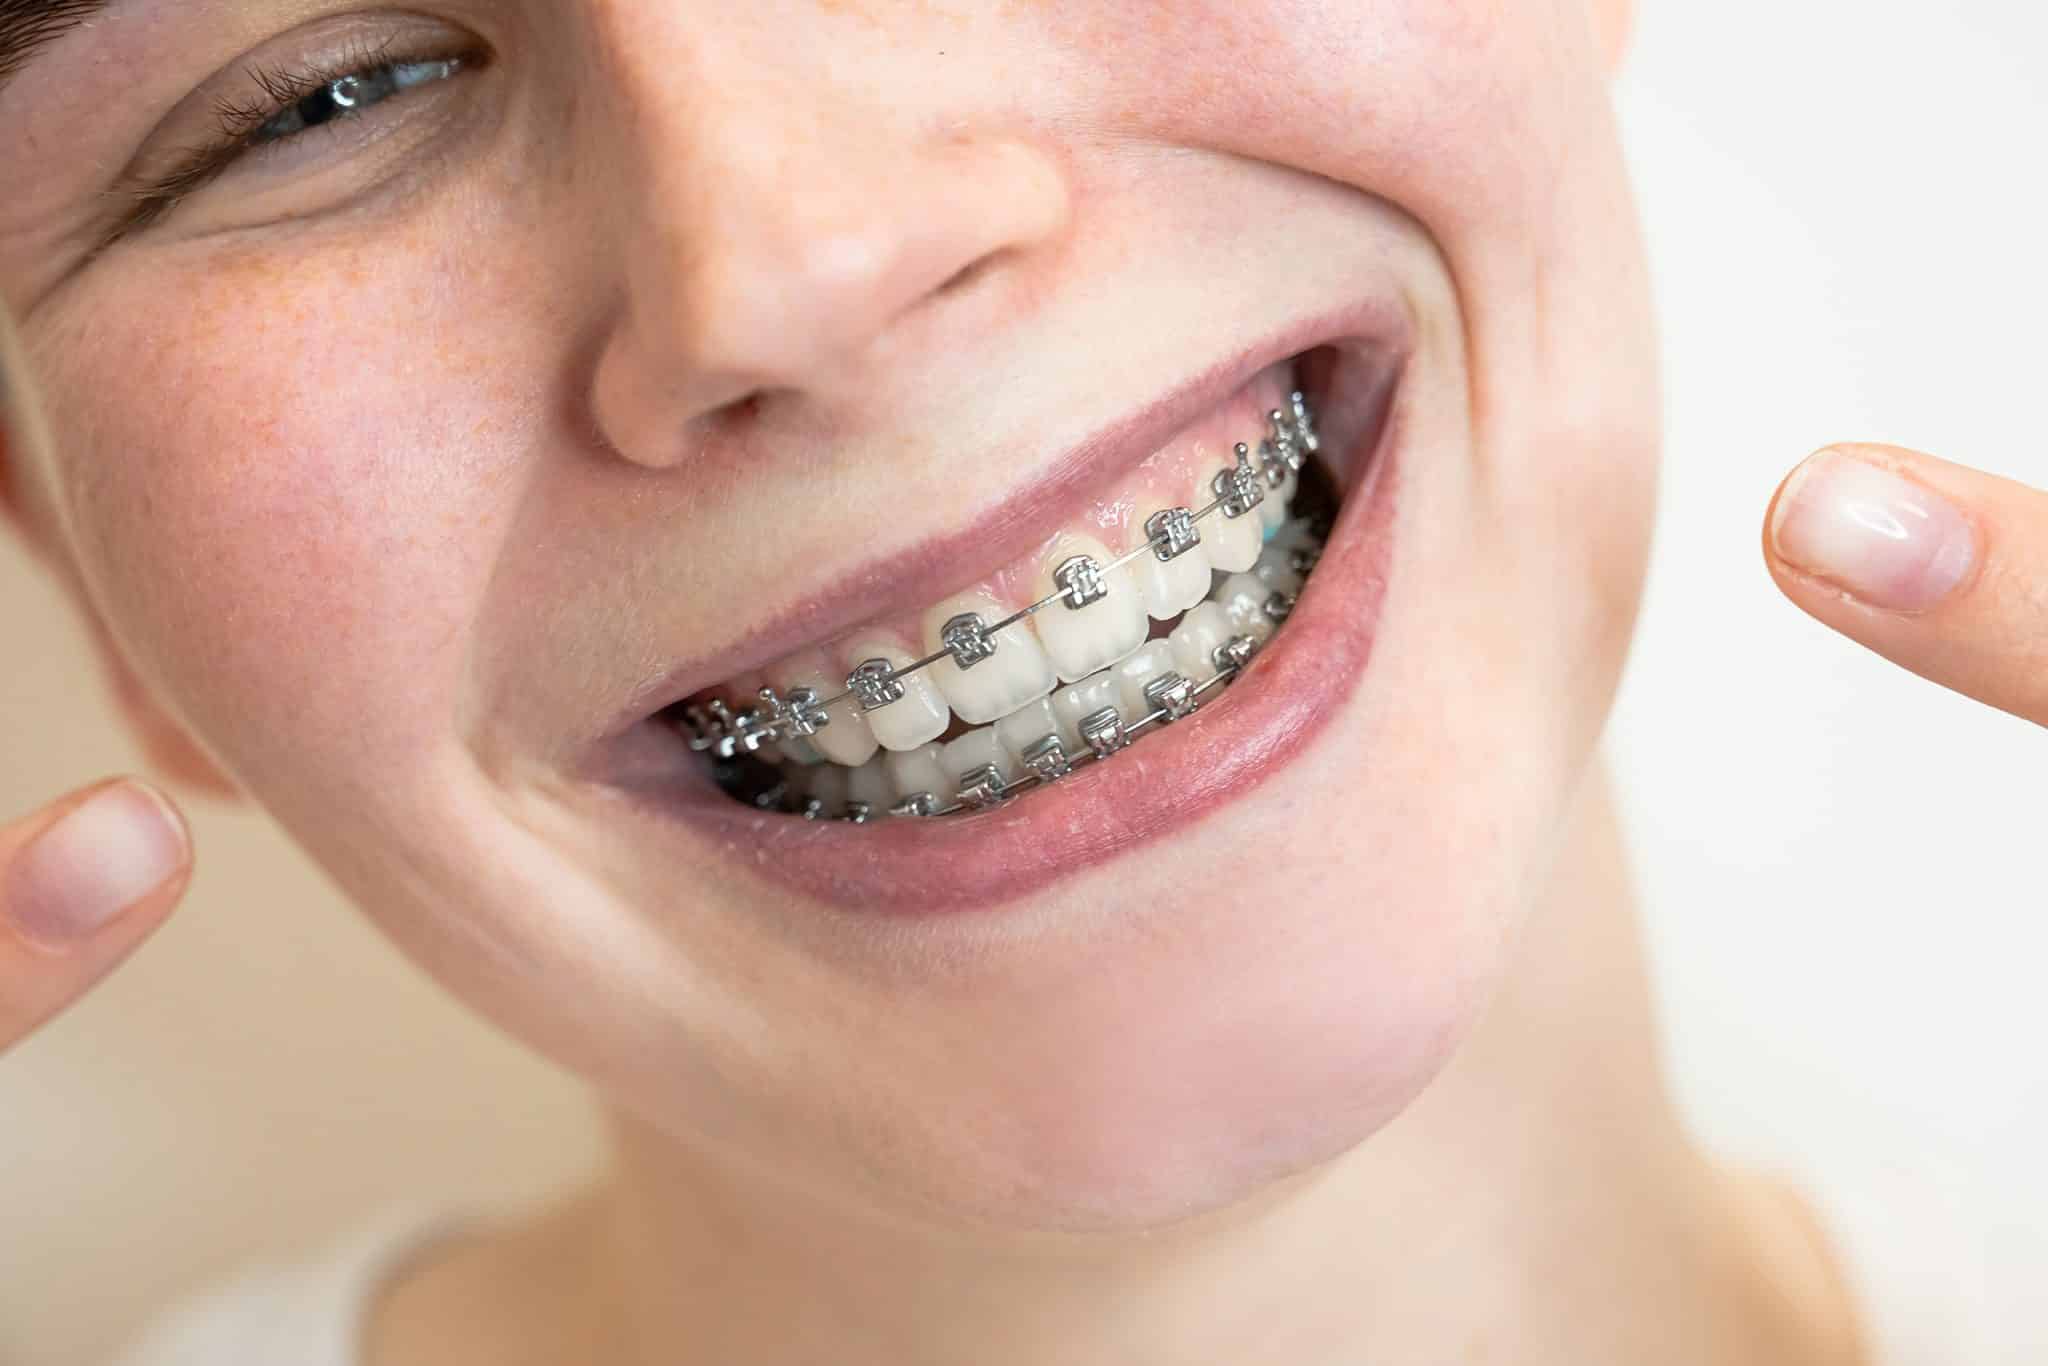 A young girl with braces.